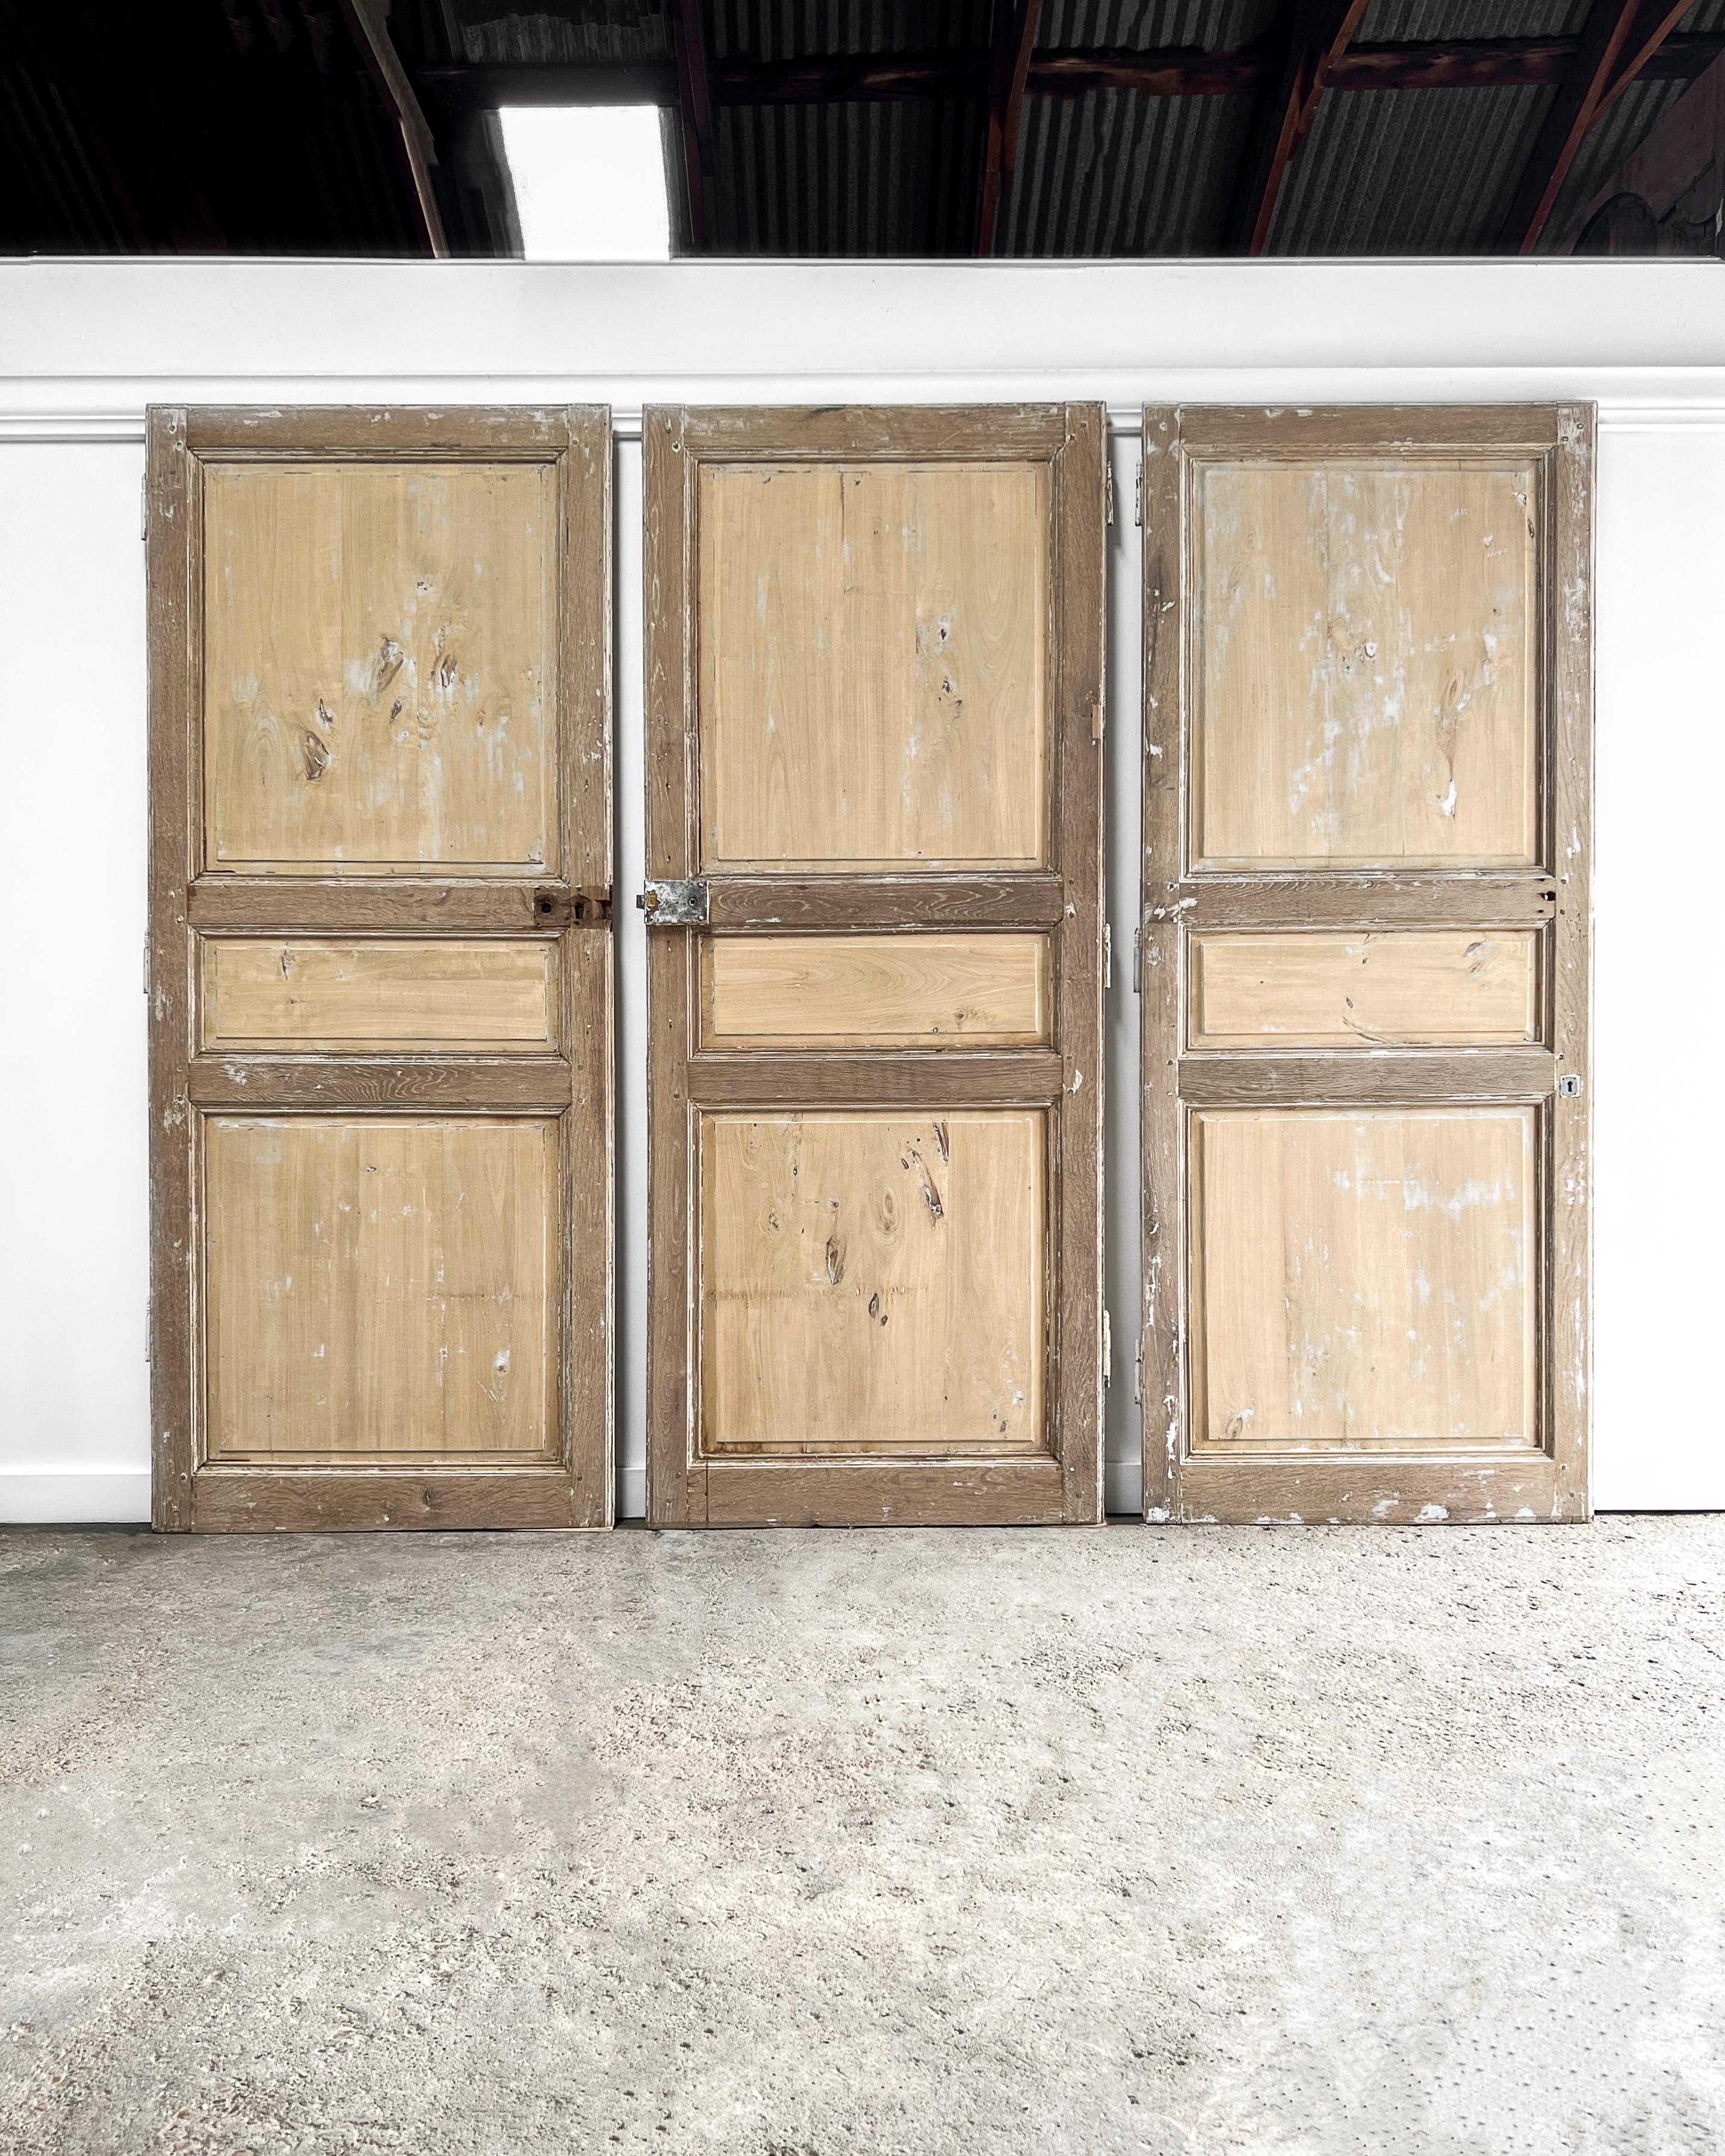 A set of three interior doors reclaimed from a home in the French countryside. Hand-crafted from poplar and oak, the doors feature a 3-panel configuration with raised panels and beveled details. Install these in your home to add an authentic air of